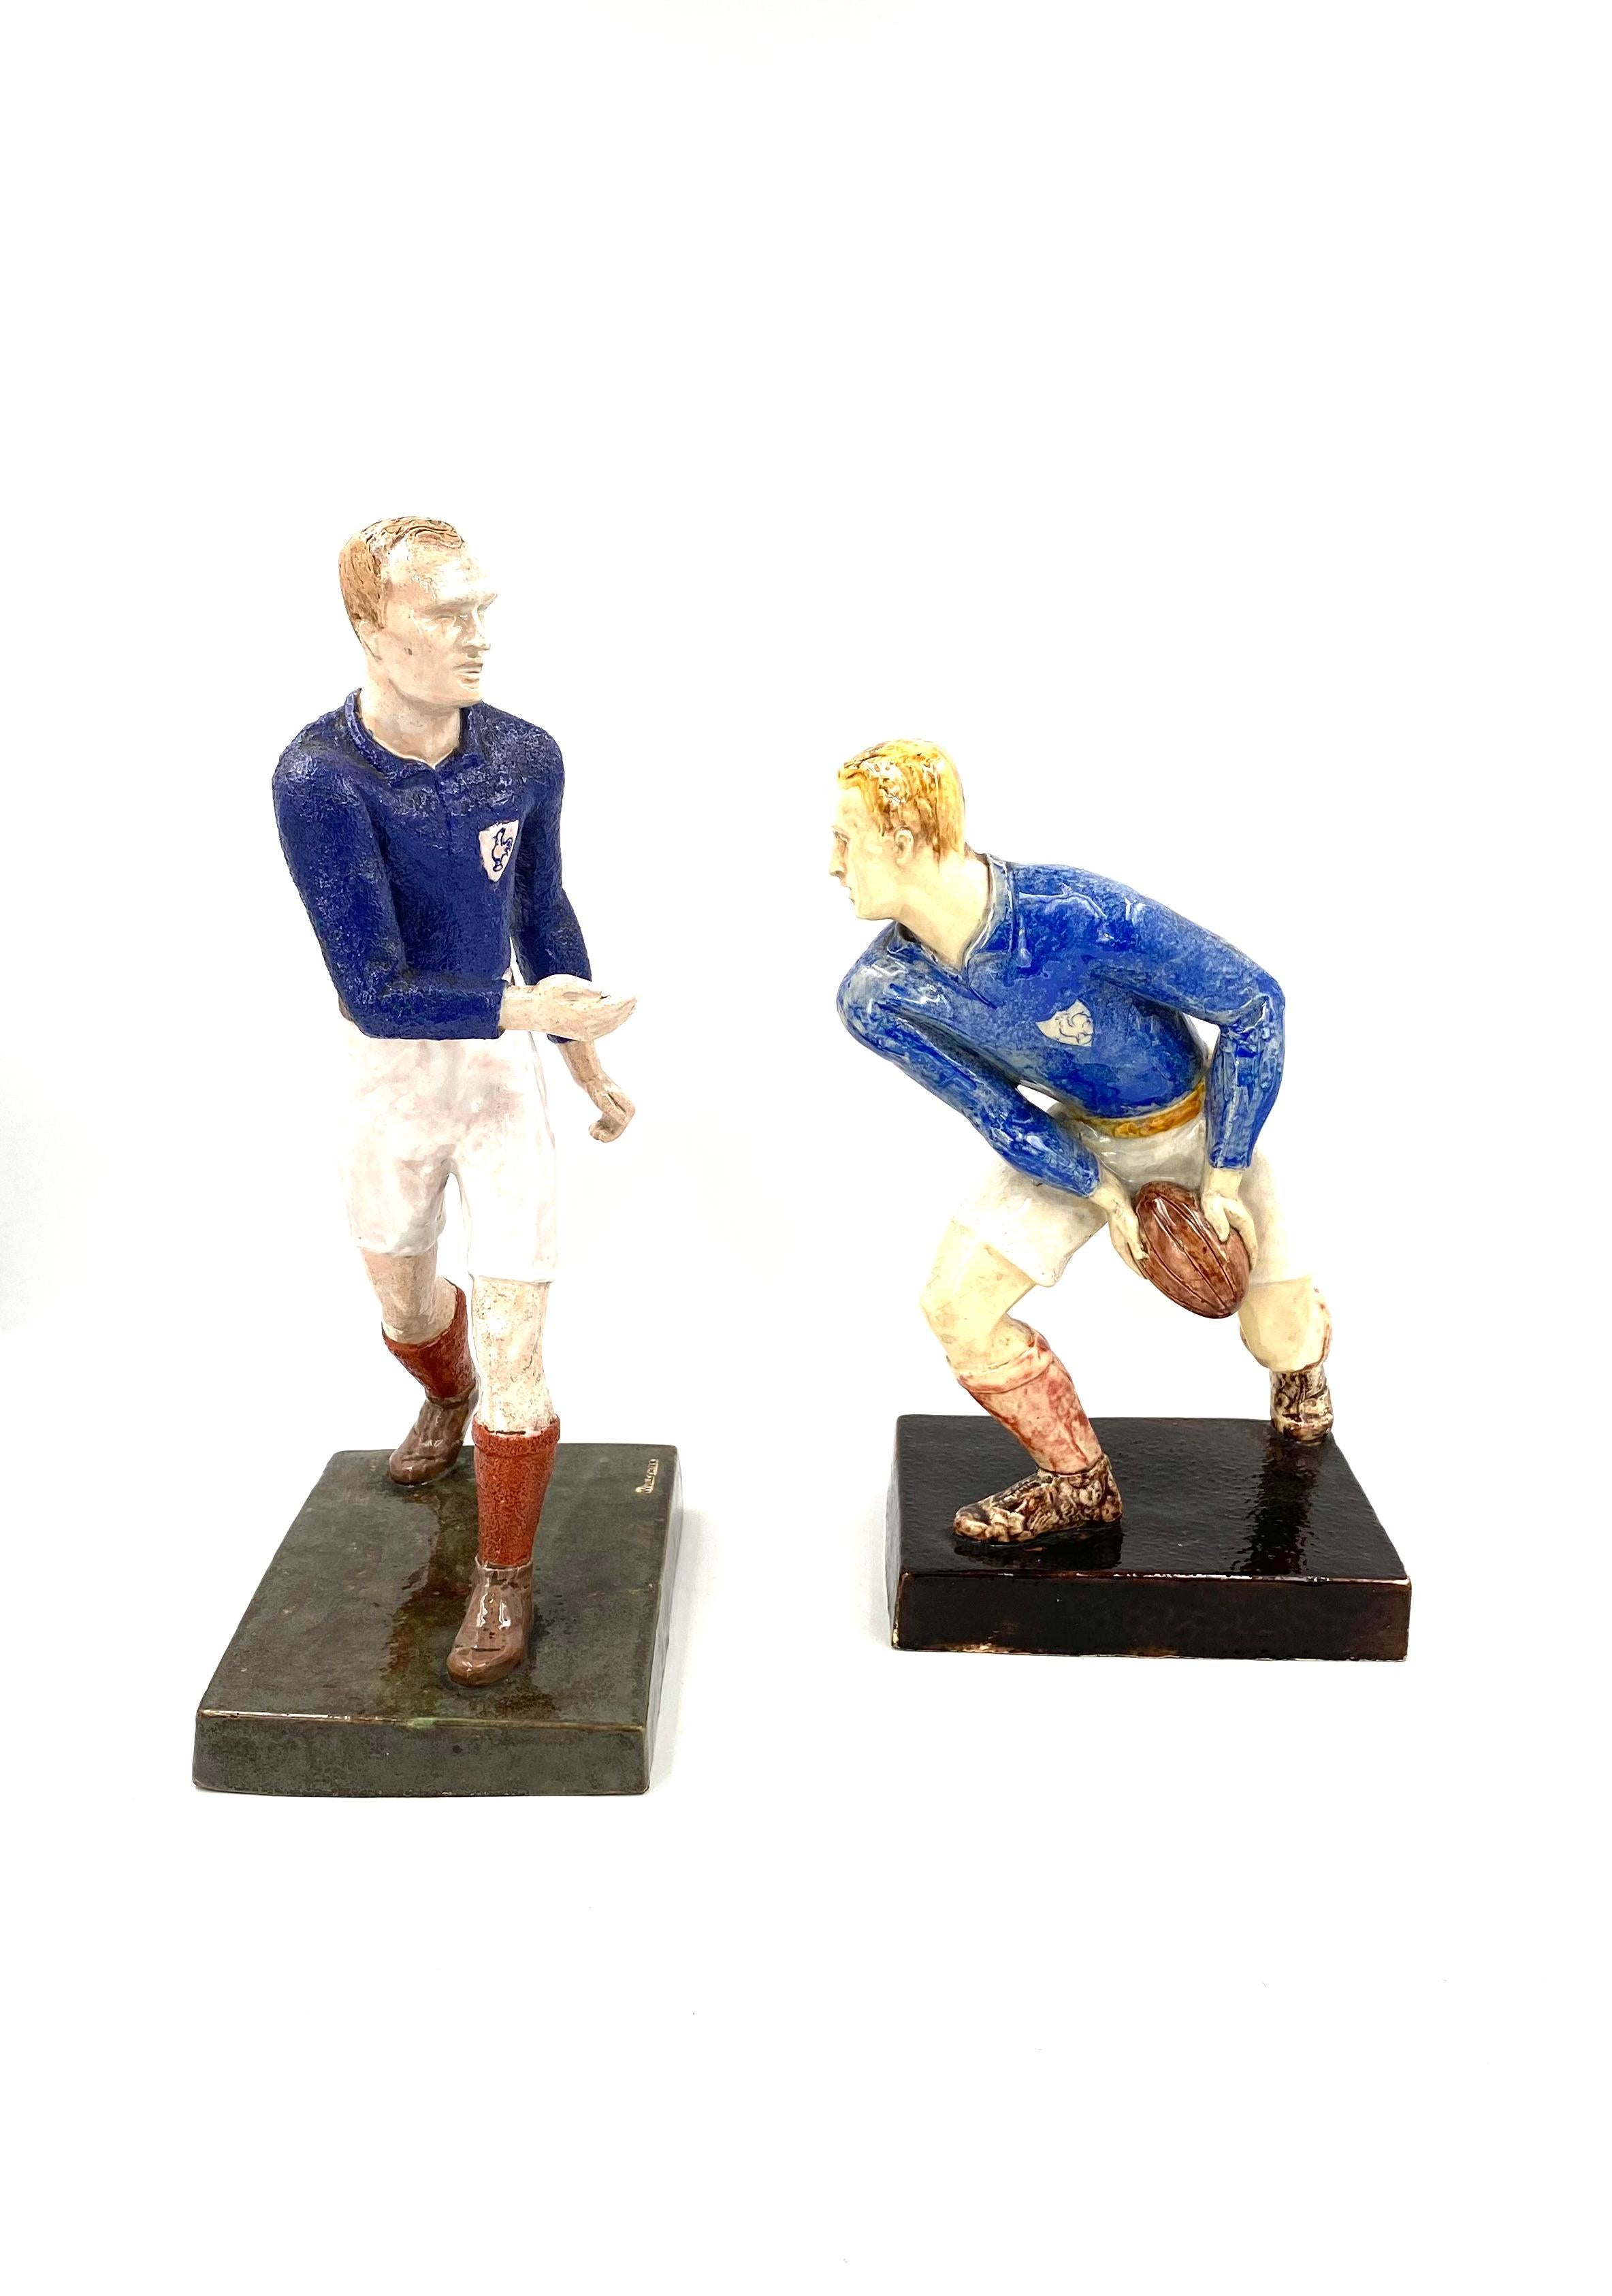 Willy Wuilleumier, Sculptures 'Les Joueurs De Rugby', G.A.M. France, 1940 In Excellent Condition For Sale In Firenze, IT